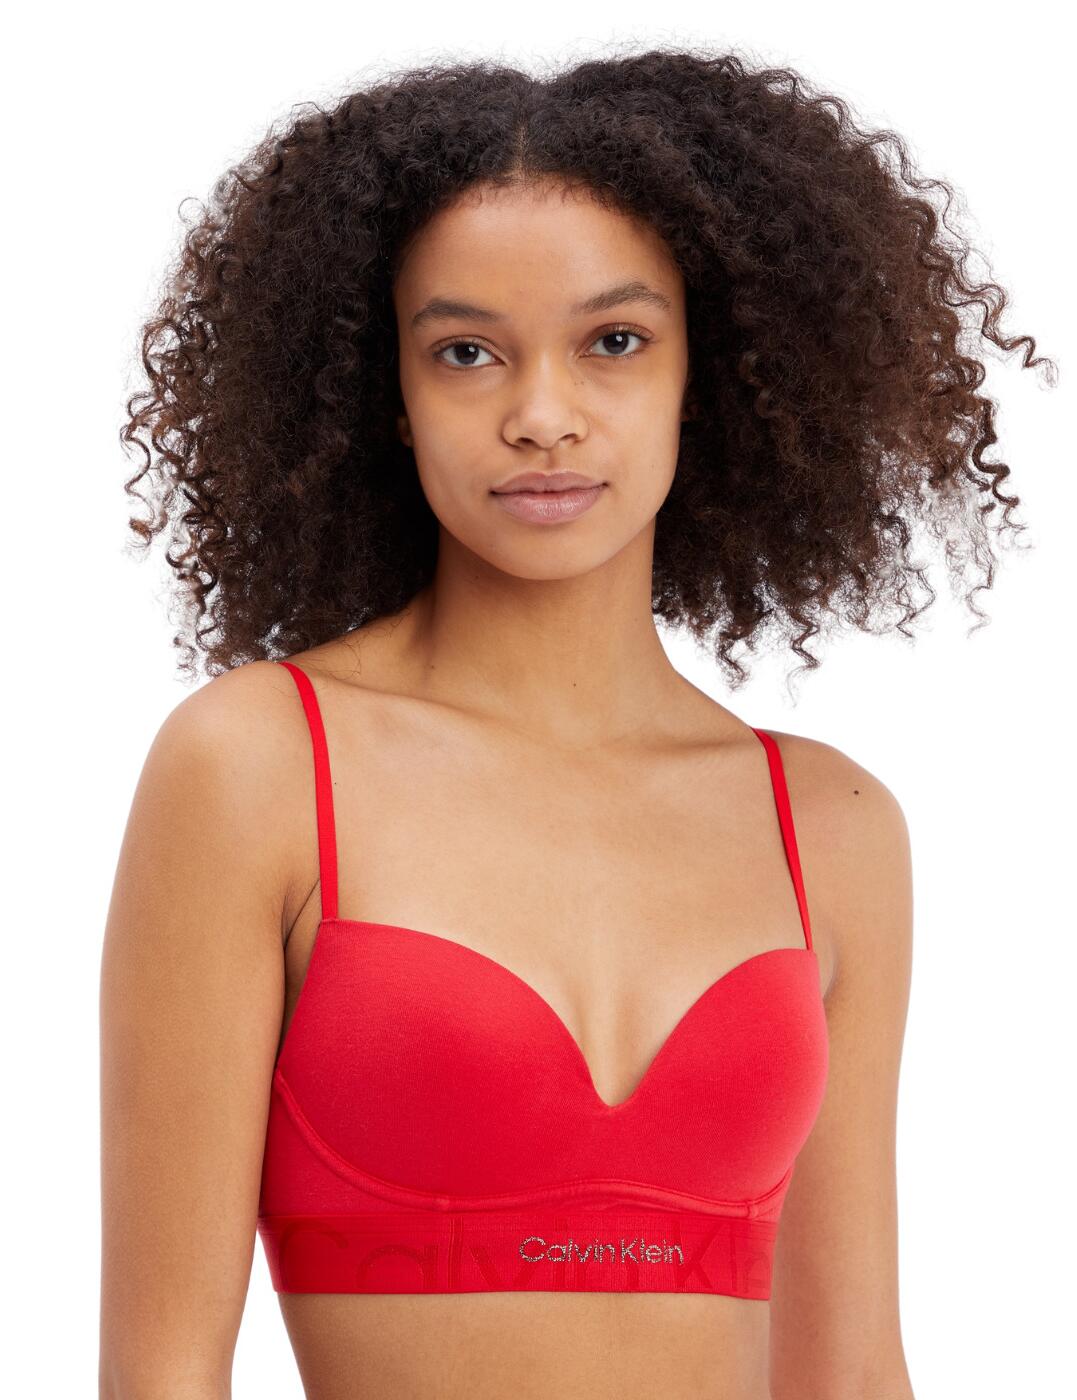 Calvin Klein Embossed Icon Holiday Bralette Bra - Belle Lingerie  Calvin  Klein Embossed Icon Holiday Unlined Bralette - Belle Lingerie